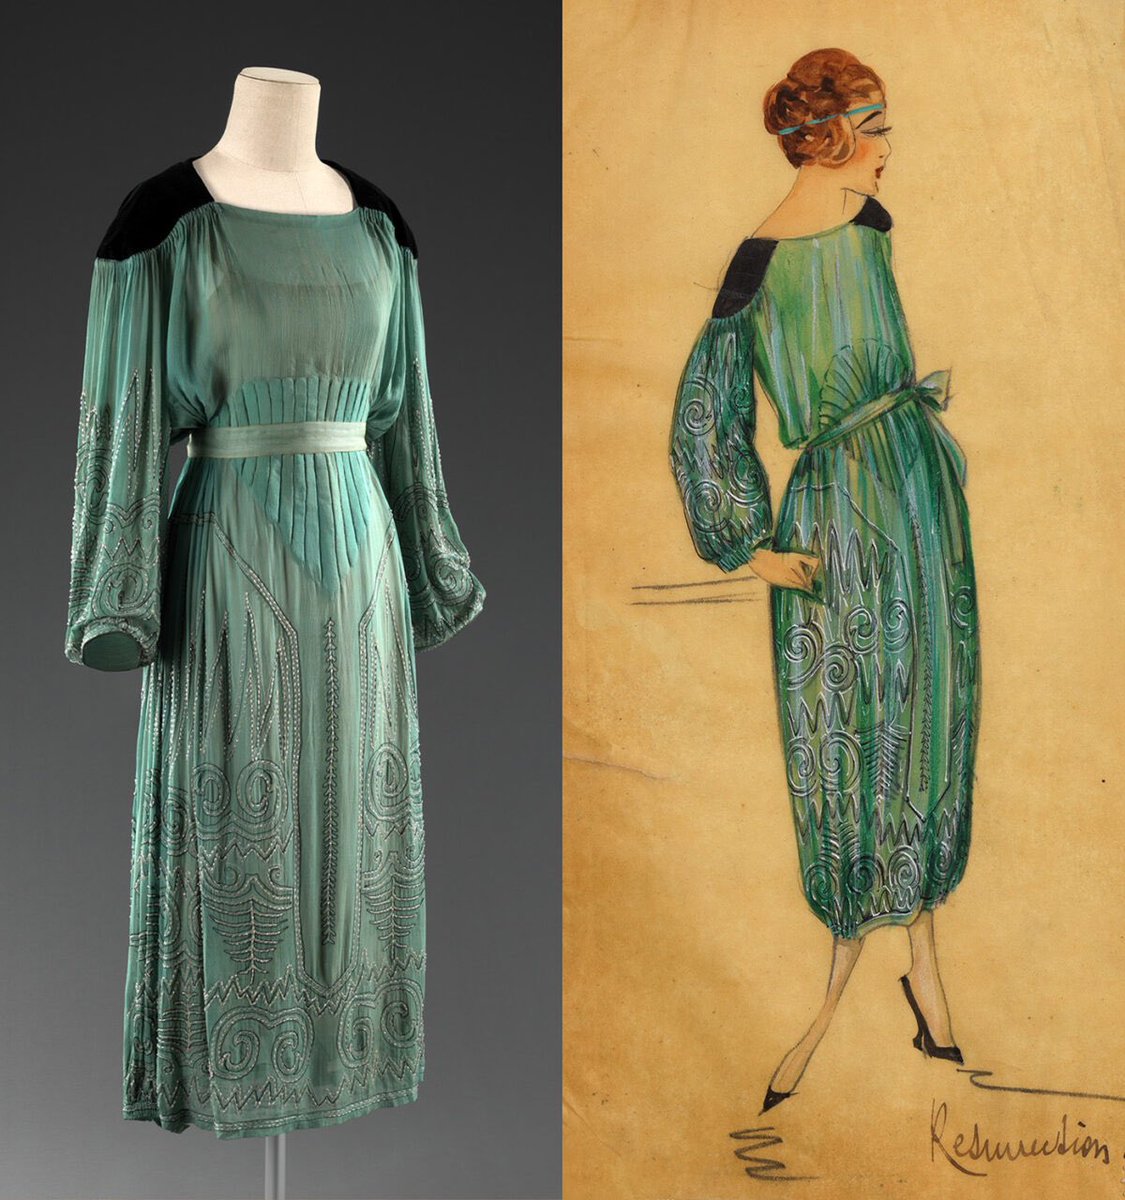 It is fascinating to see how a designer envisaged a garment alongside the actual piece. Glowing turquoise in crepe & velvet with a twinkle of beads were captured on paper by #Lanvin in 1919 & brought to life in cloth. #patrimoinelanvin #fashionhistory